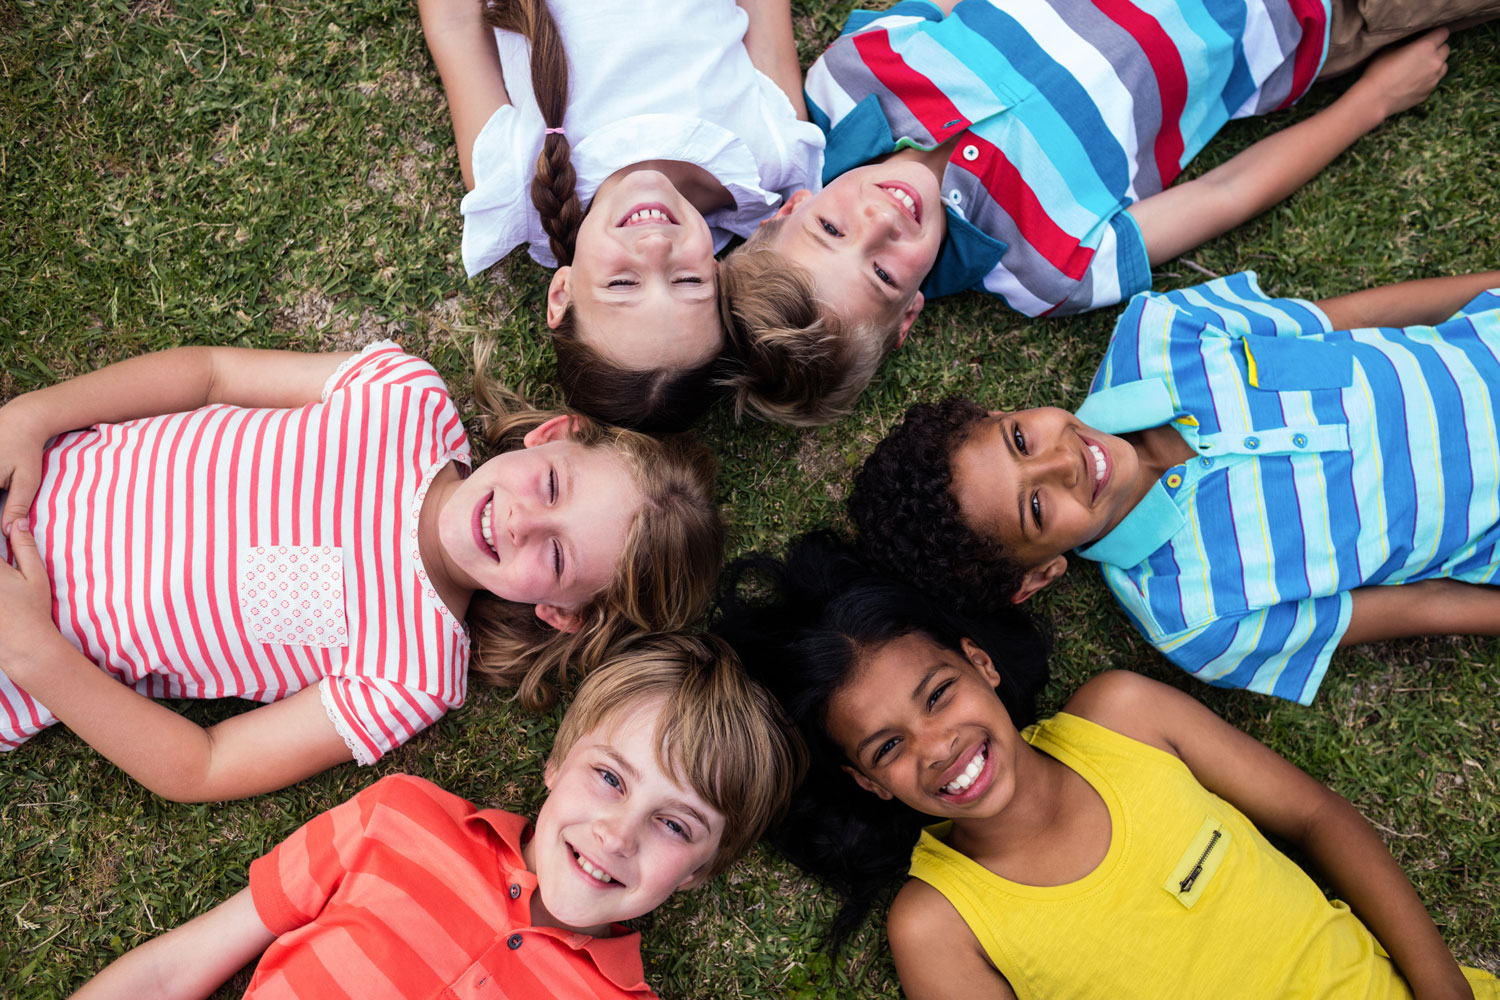 A group of children are lying on grass in a circle and smiling.